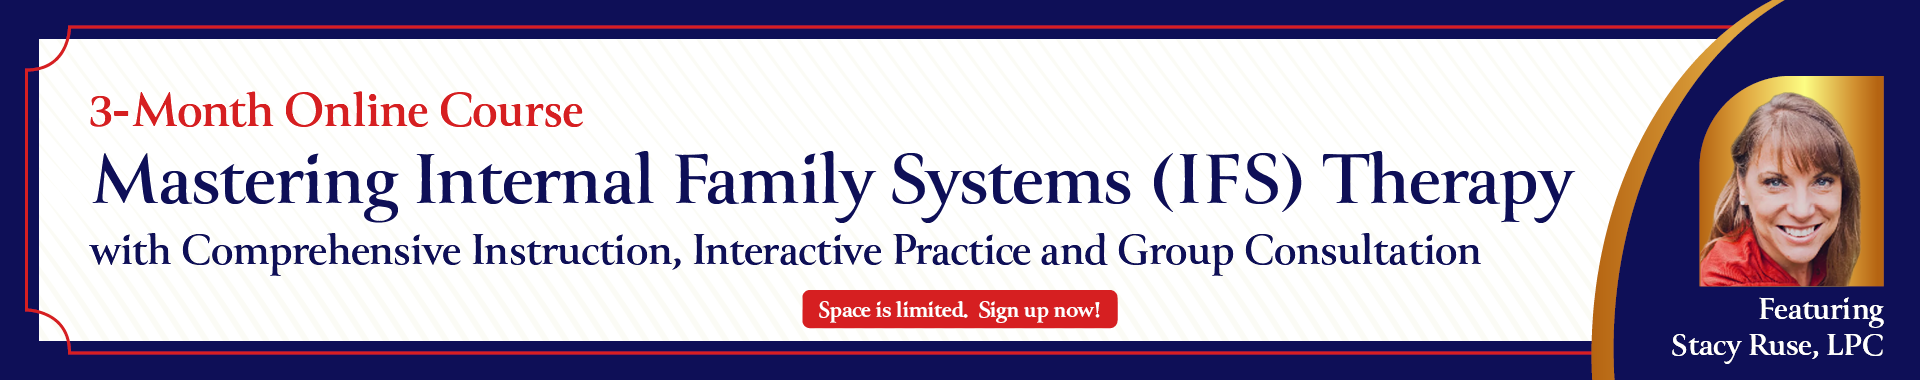 3-Month Online Course on Mastering Internal Family Systems (IFS) Therapy